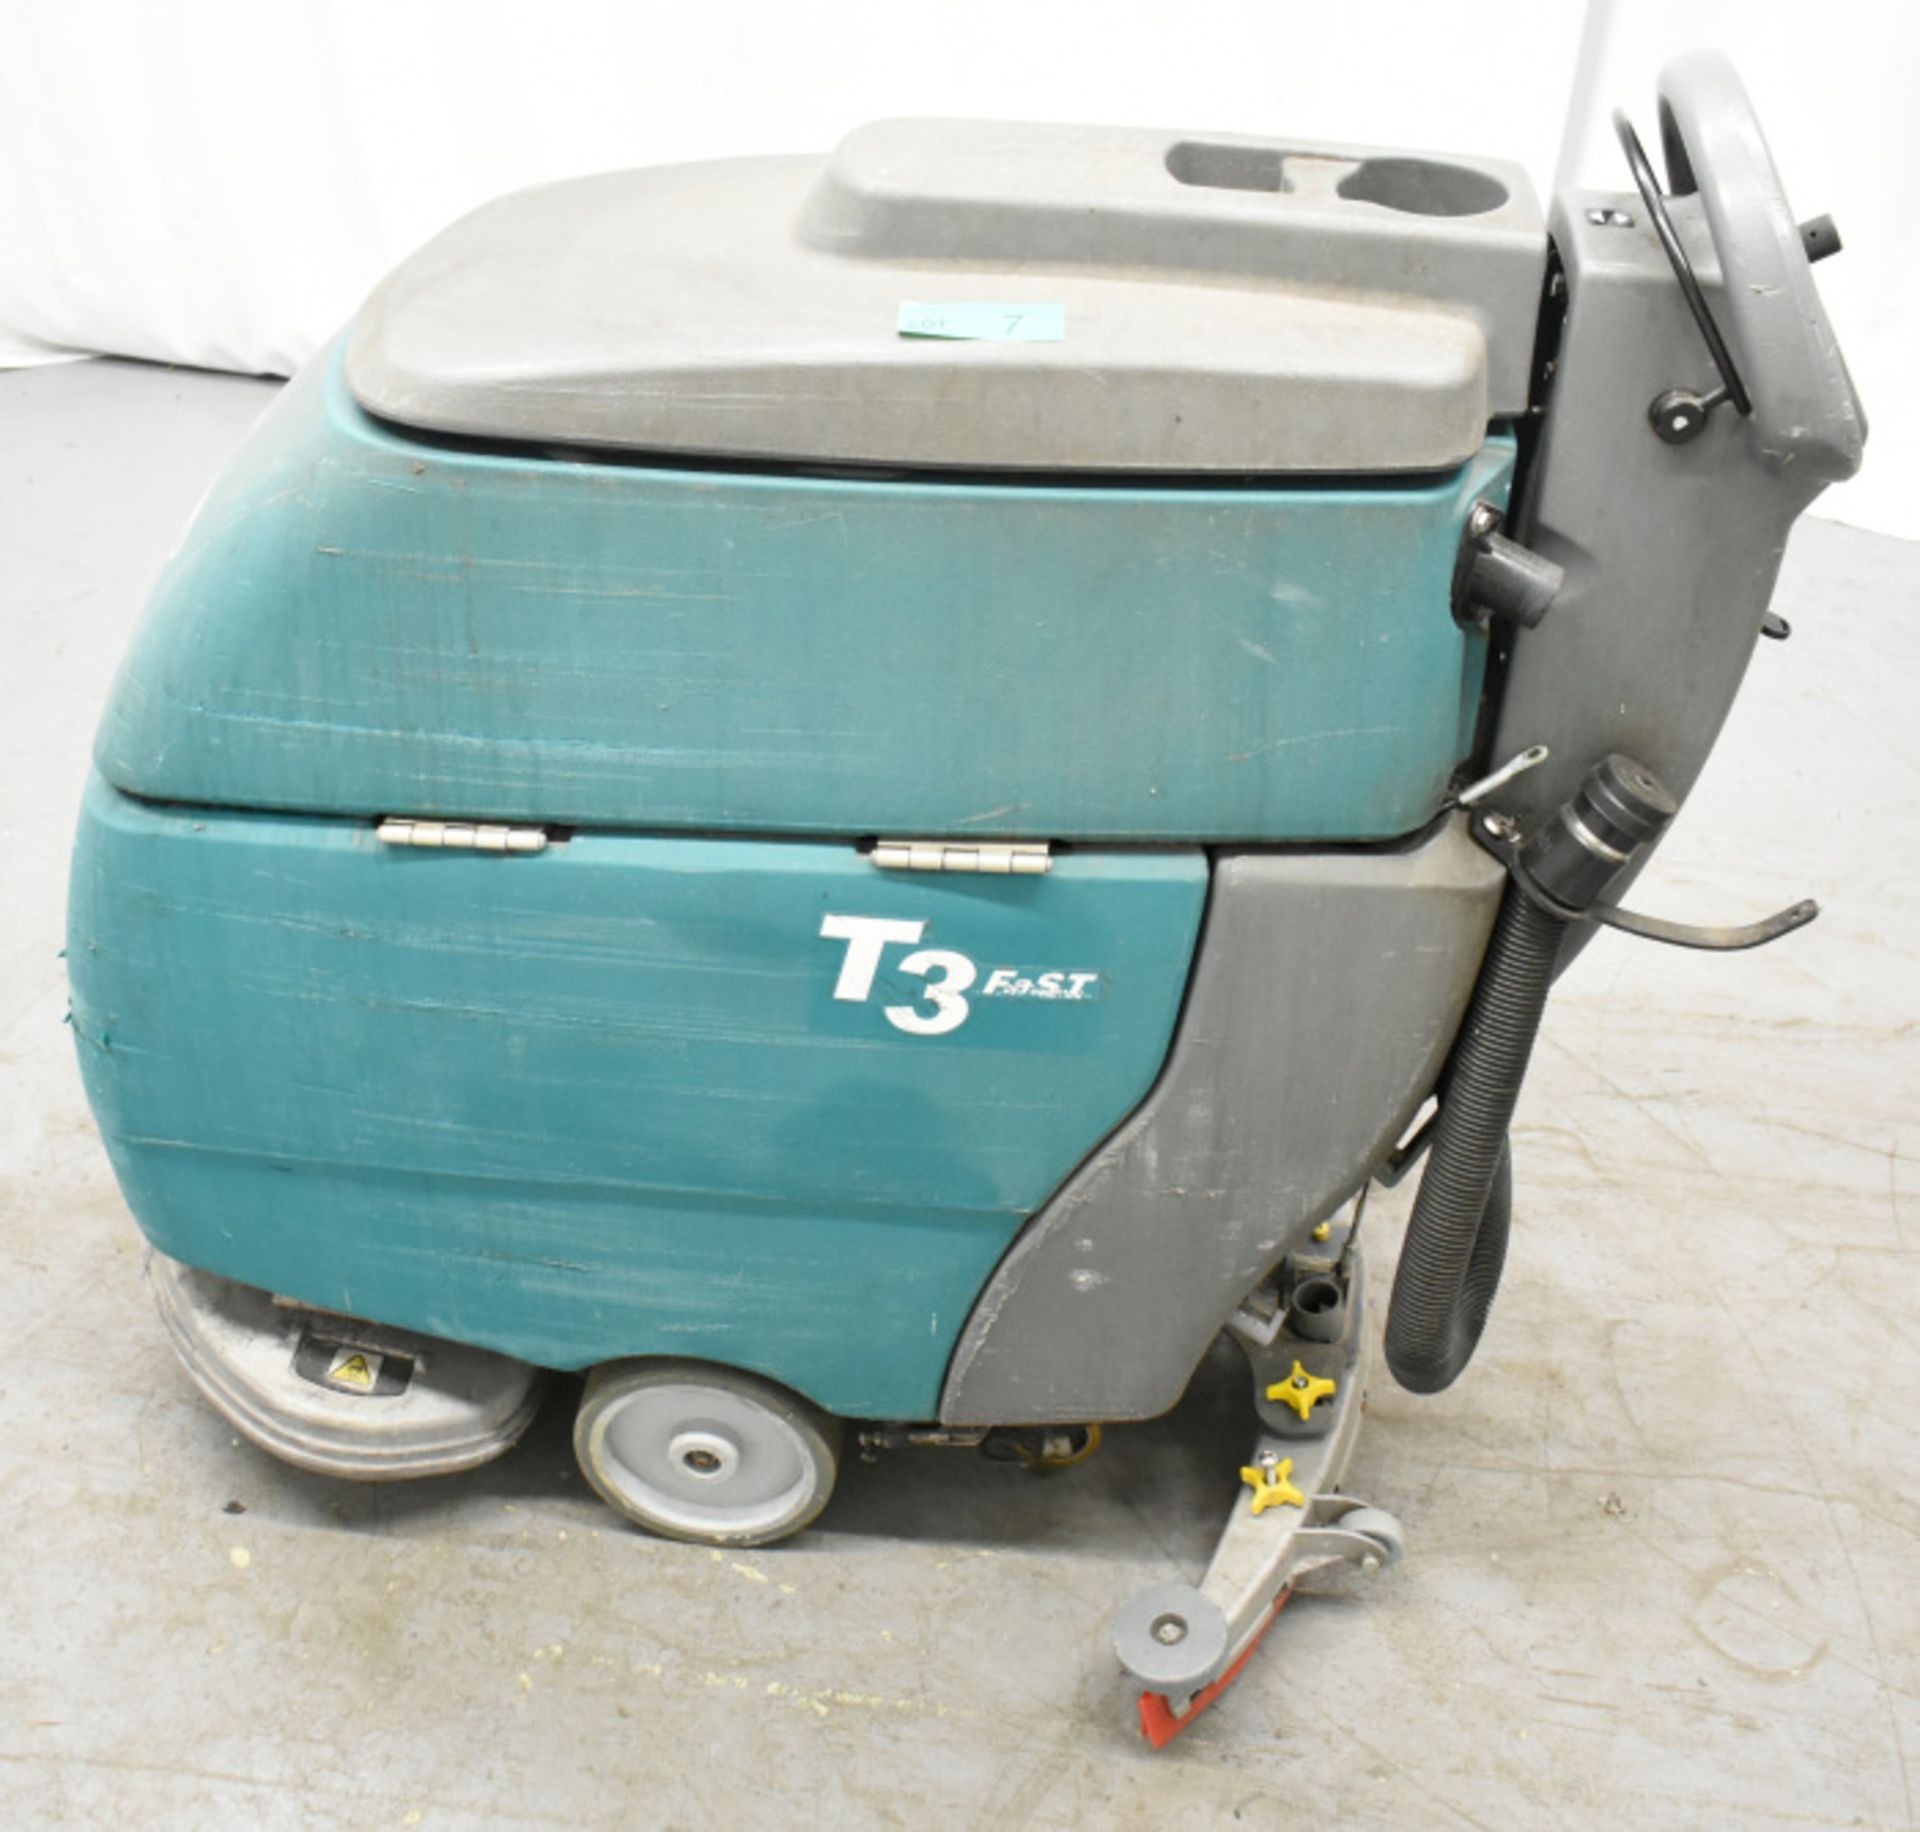 Tennant T3 Fast, comes with key and working charger, starts and runs, cleaning functionality unteste - Image 2 of 11